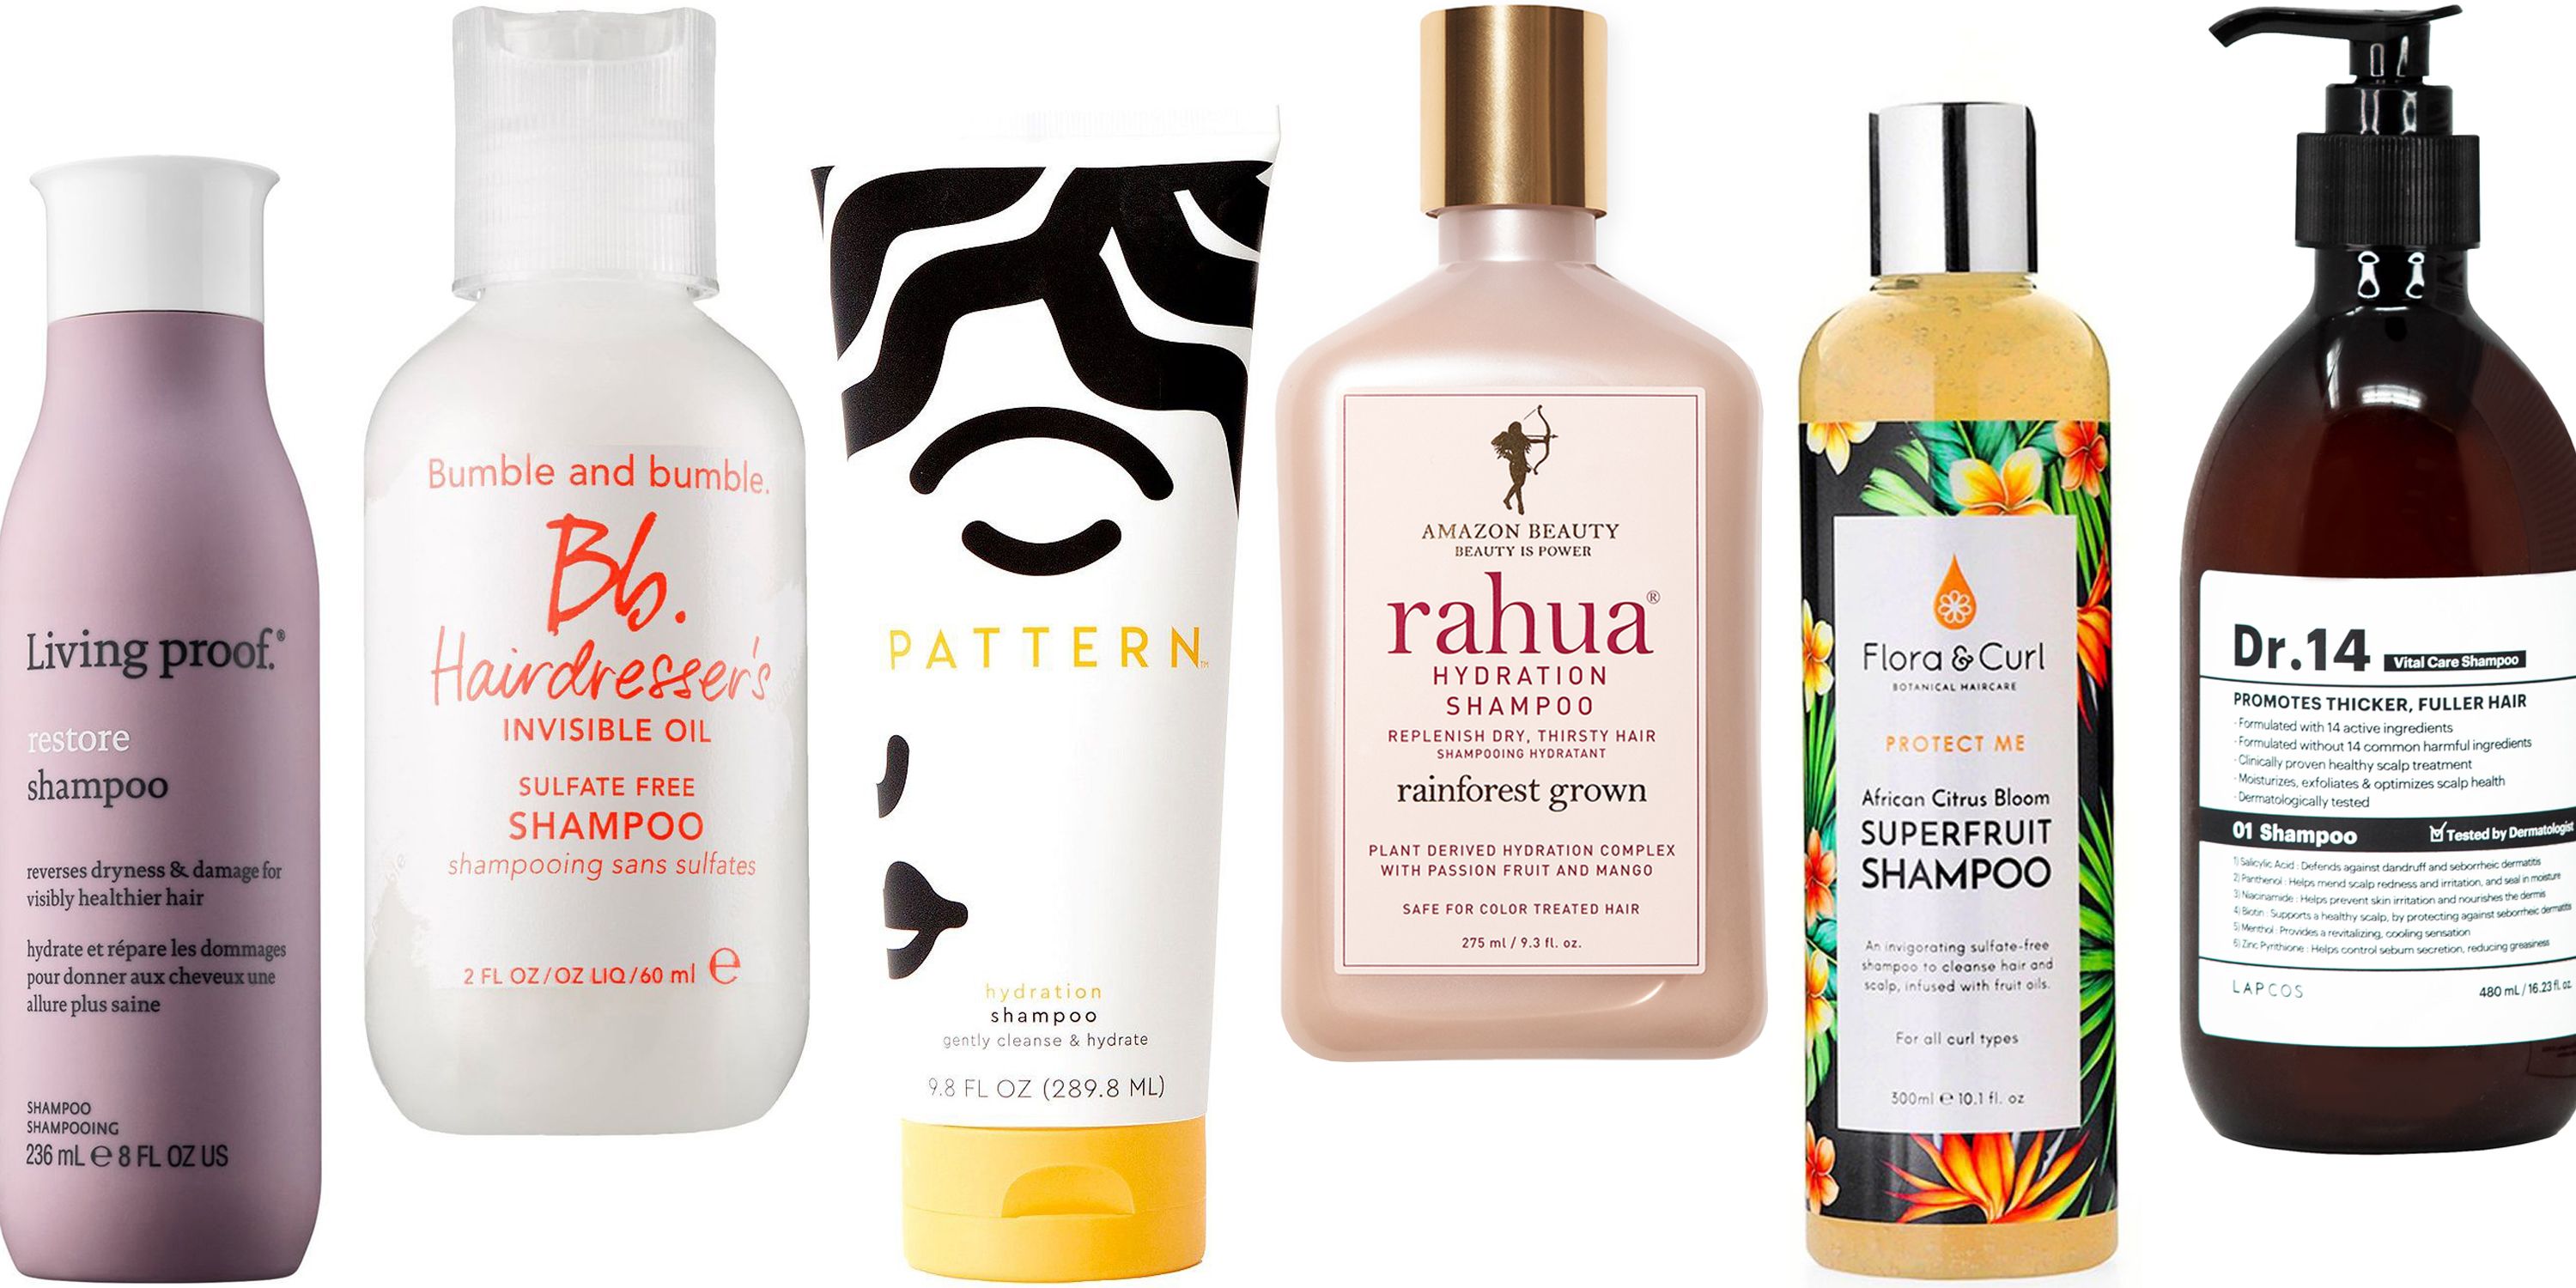 The 13 best shampoos for every hair type and budget